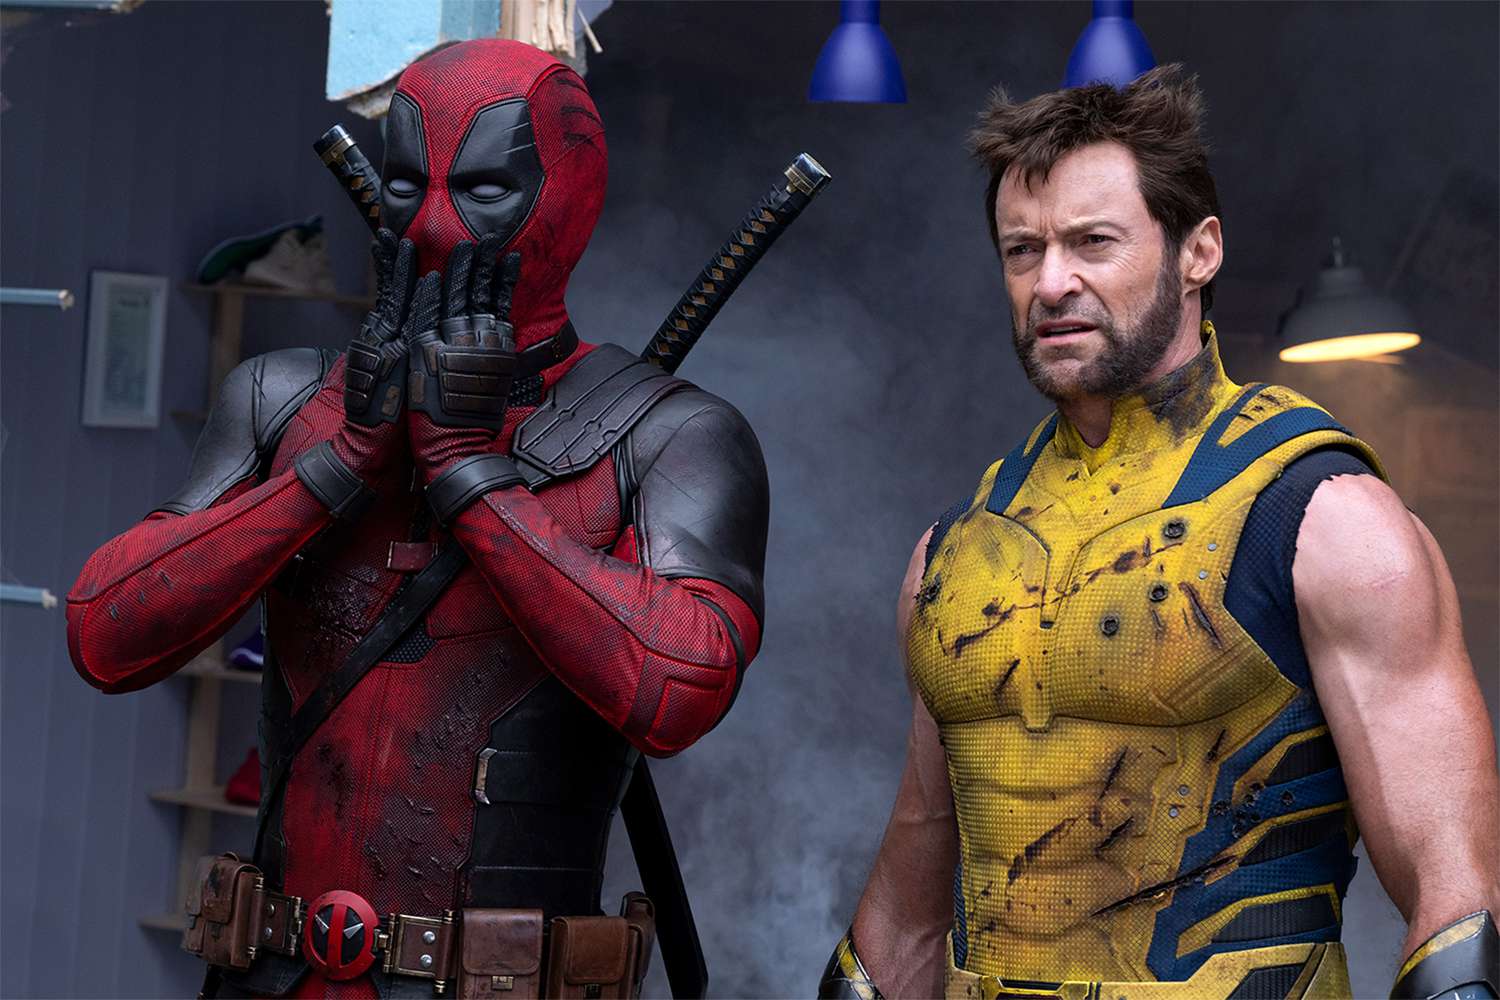 ‘Deadpool & Wolverine’ get sincere in final trailer — with a surprise appearance from an old friend